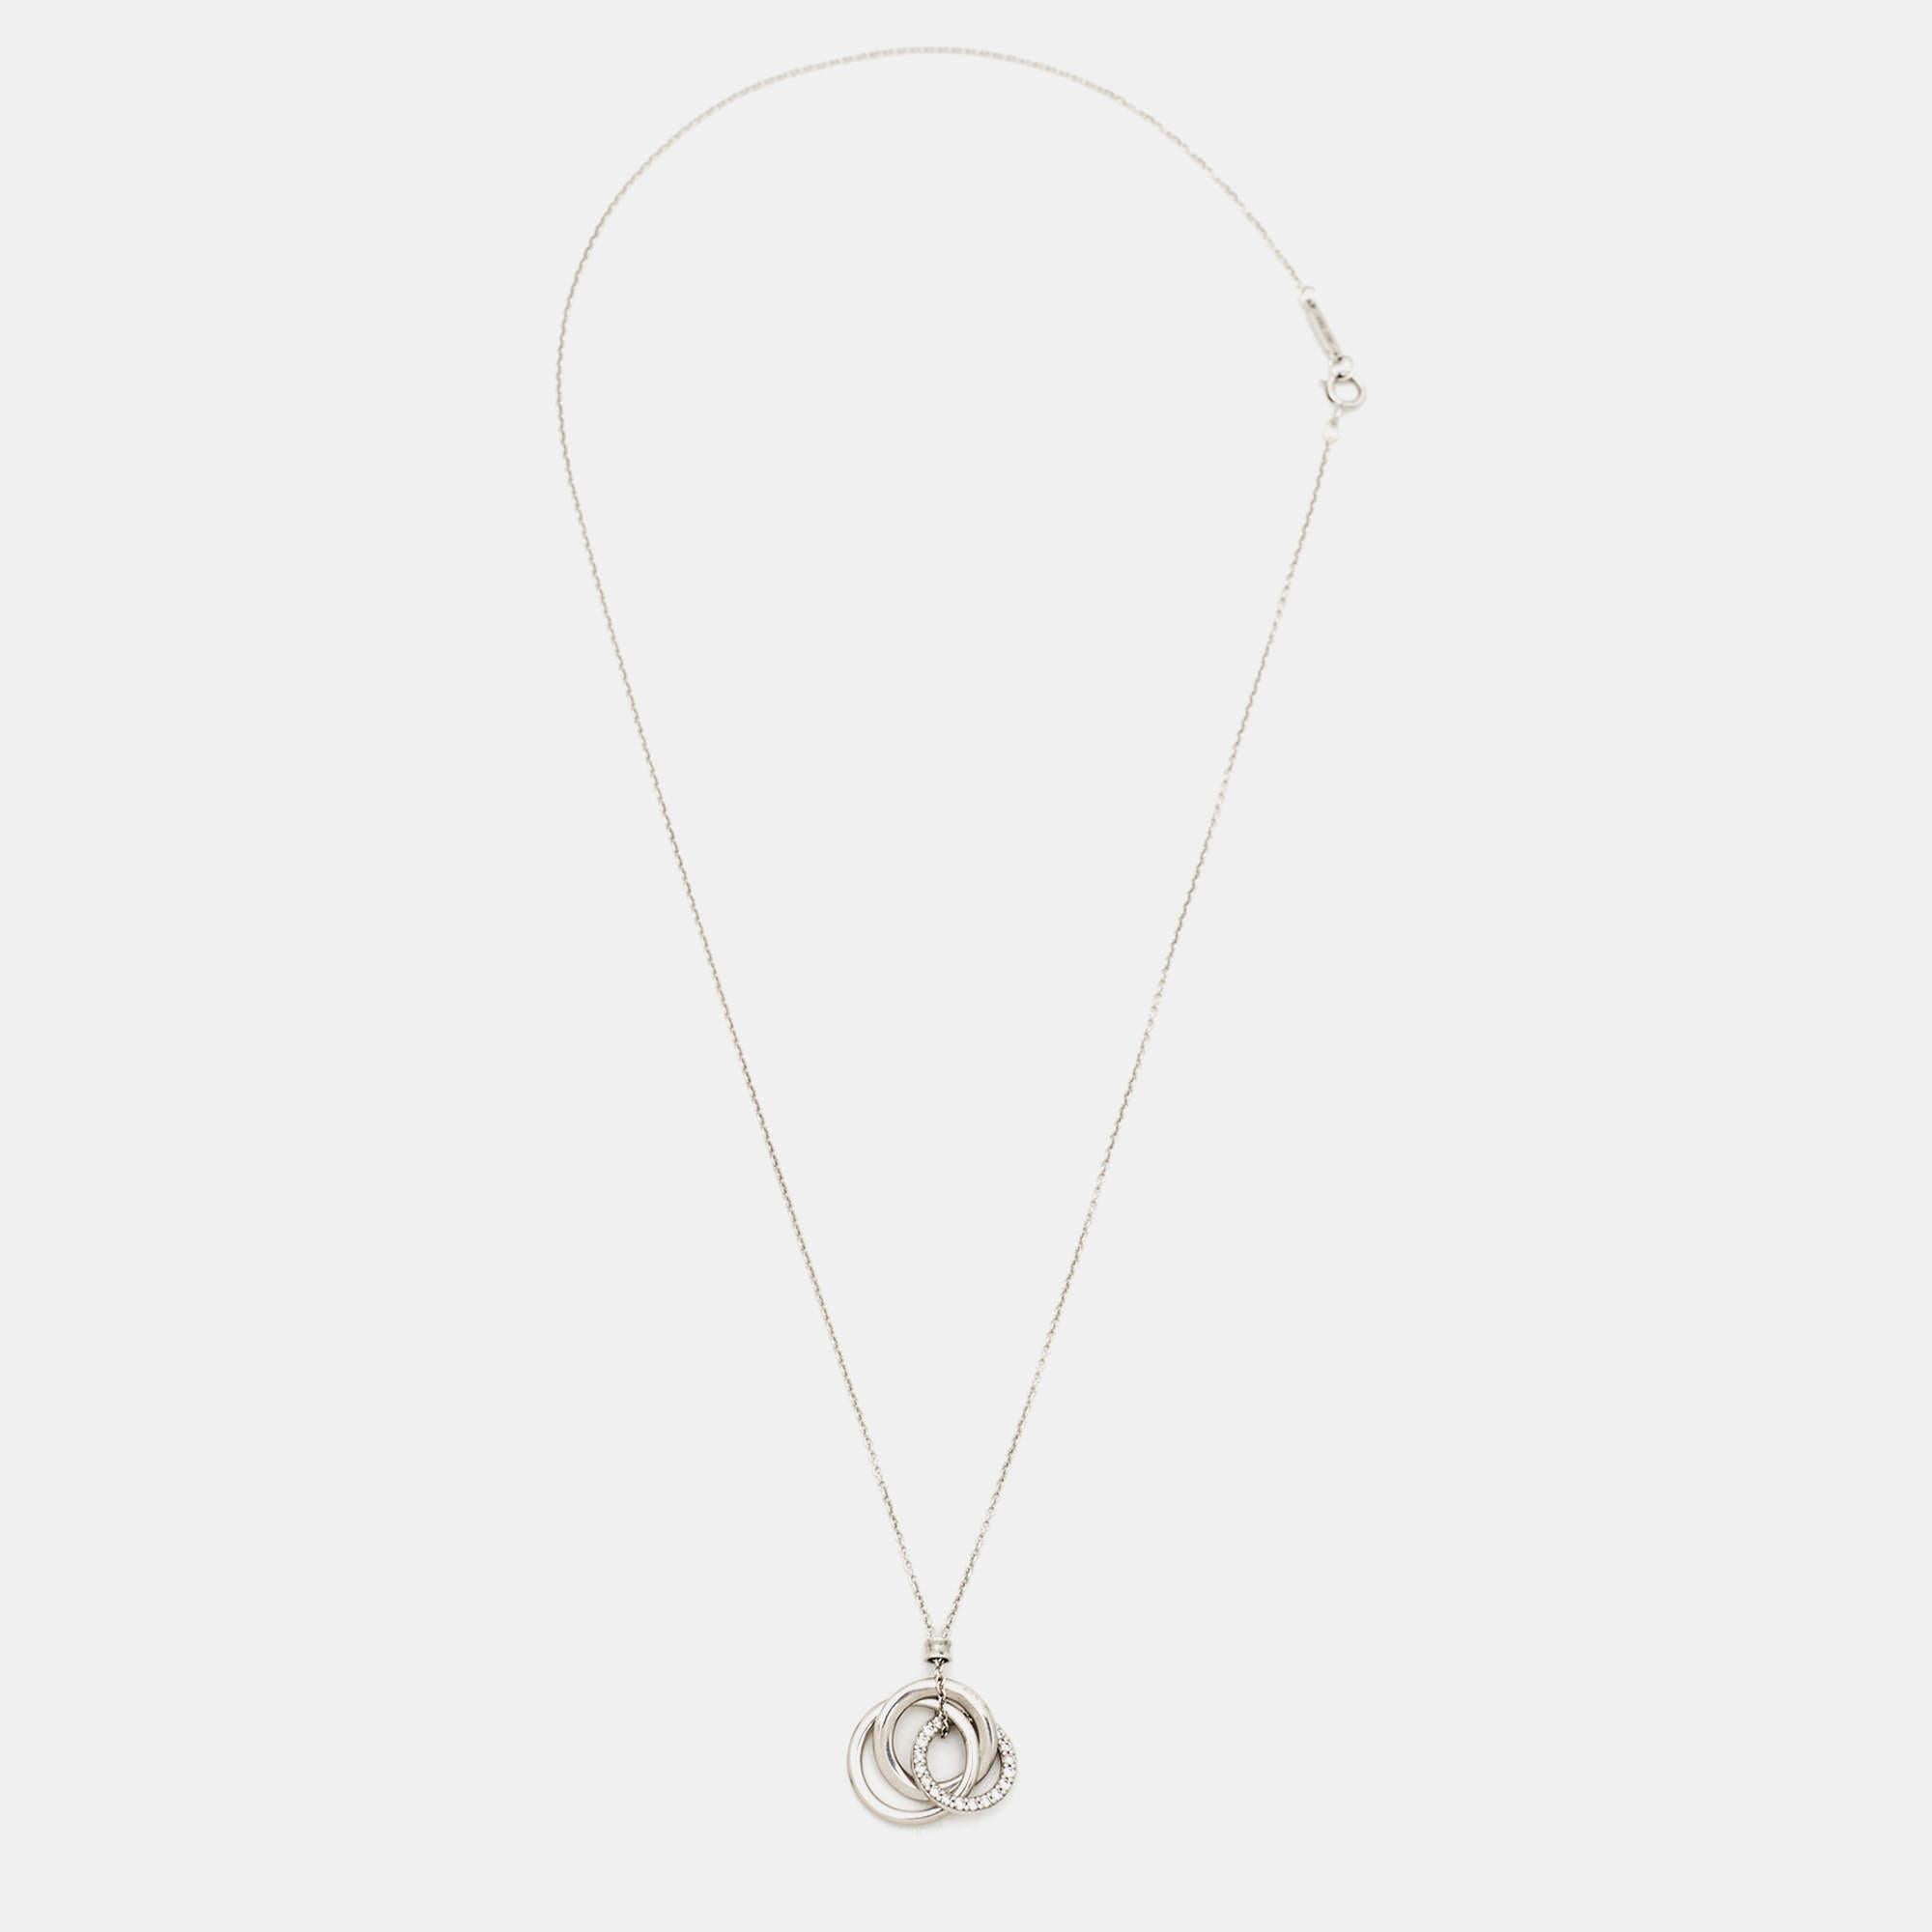 We'd love this Tiffany & Co. piece to complement our everyday style. The 18k white gold necklace comes with a pendant of three interlocking rings, one of which is embellished with diamonds.

Includes
Original Box, Original Case